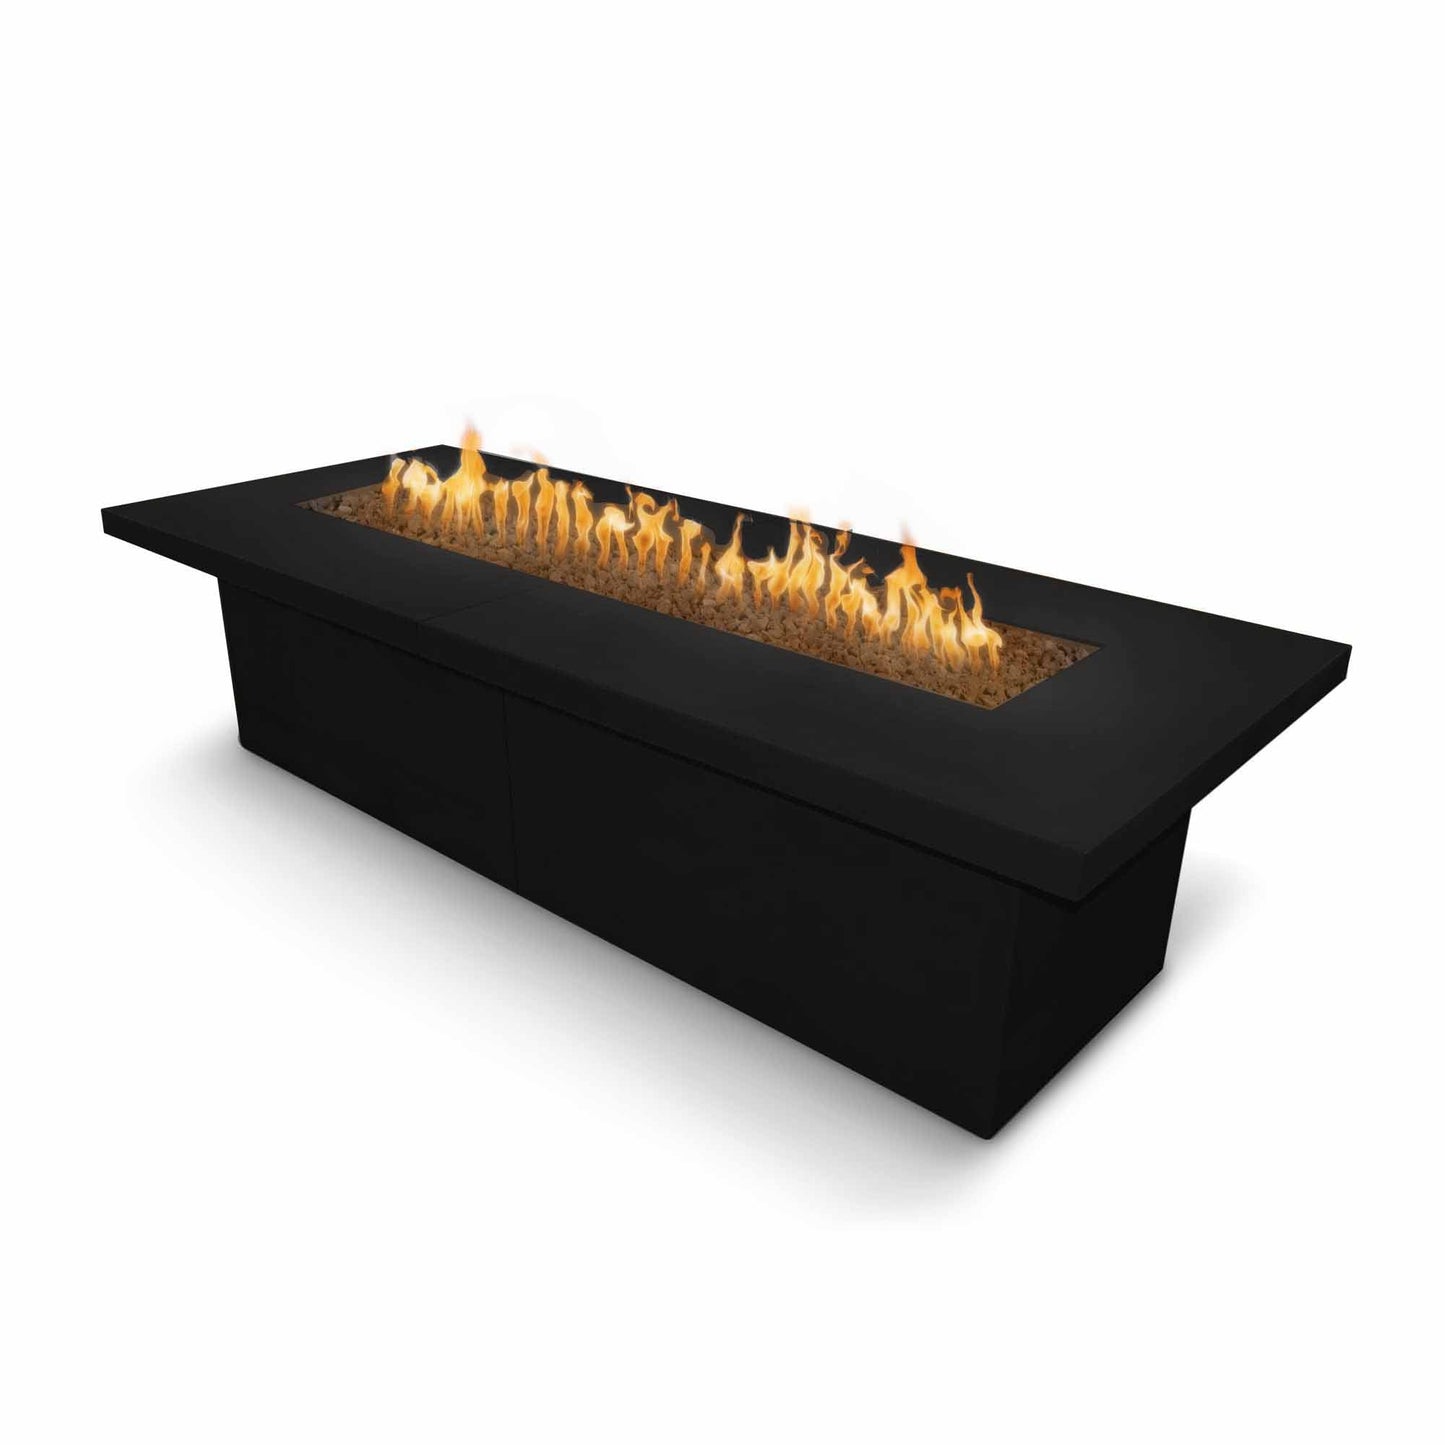 The Outdoor Plus Rectangular Newport 144" Stainless Steel Natural Gas Fire Pit with 12V Electronic Ignition